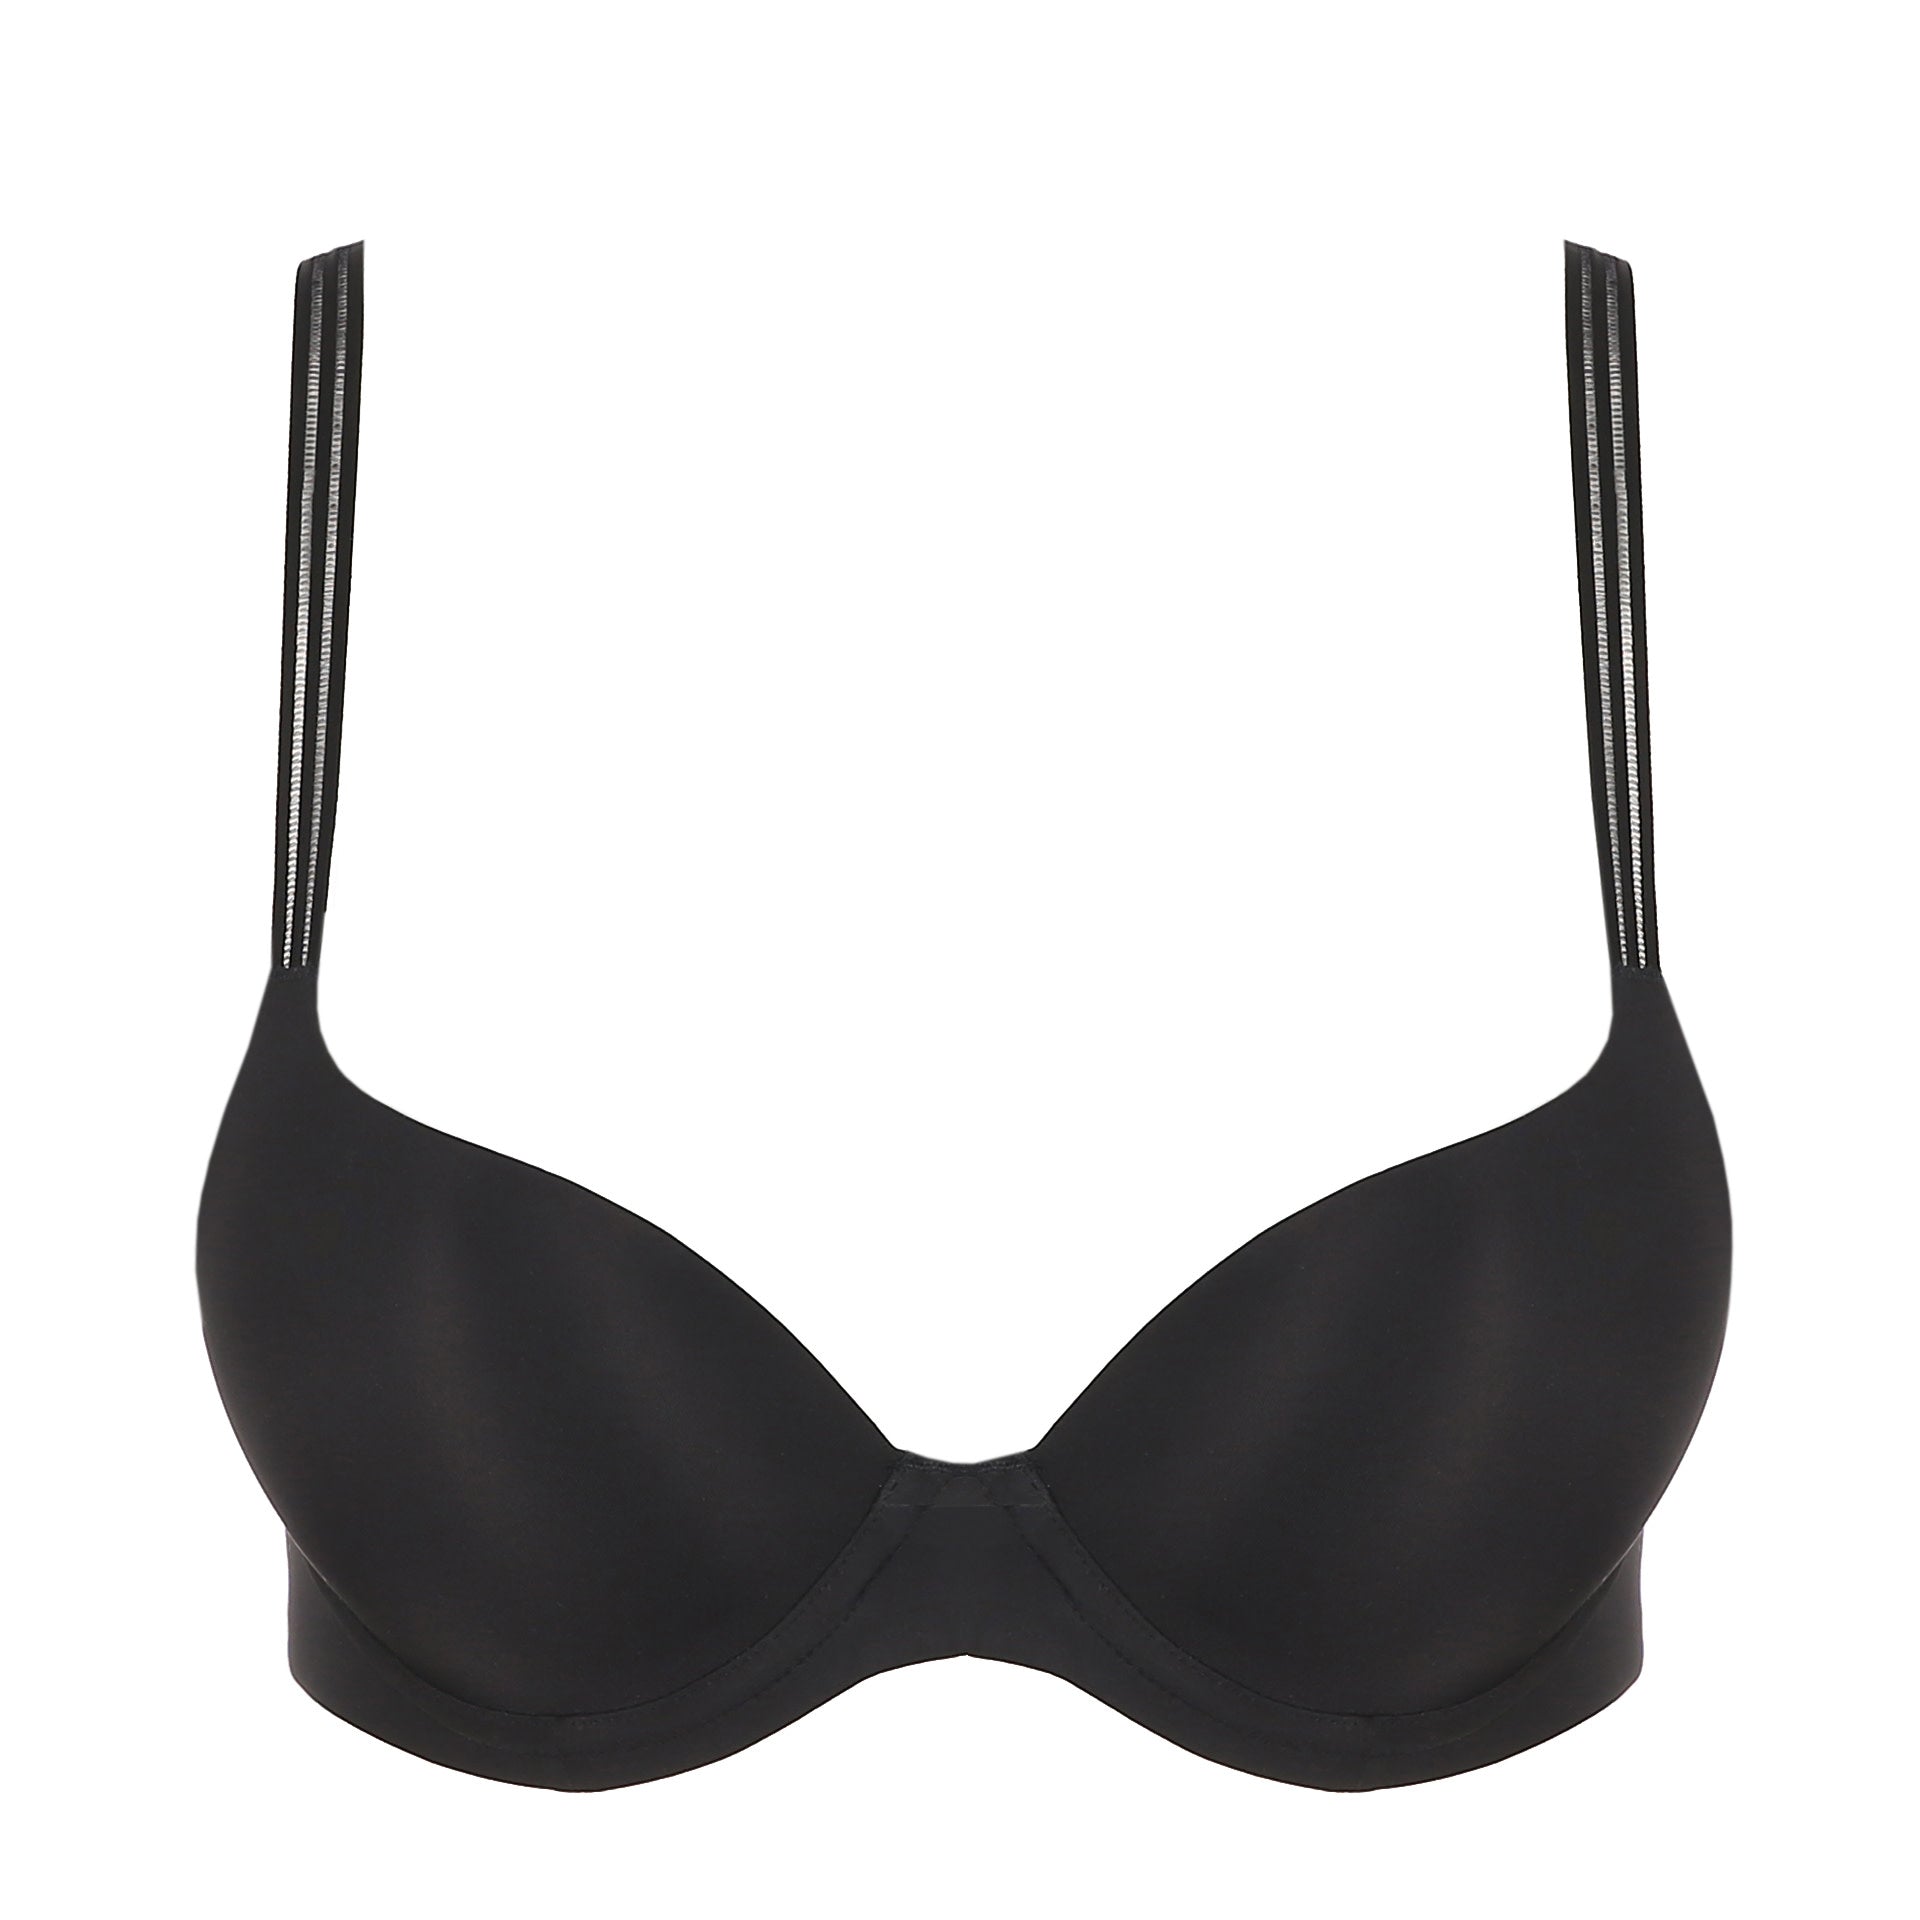 The Short Way - Lingerie Push-Up Bras - The Short Way